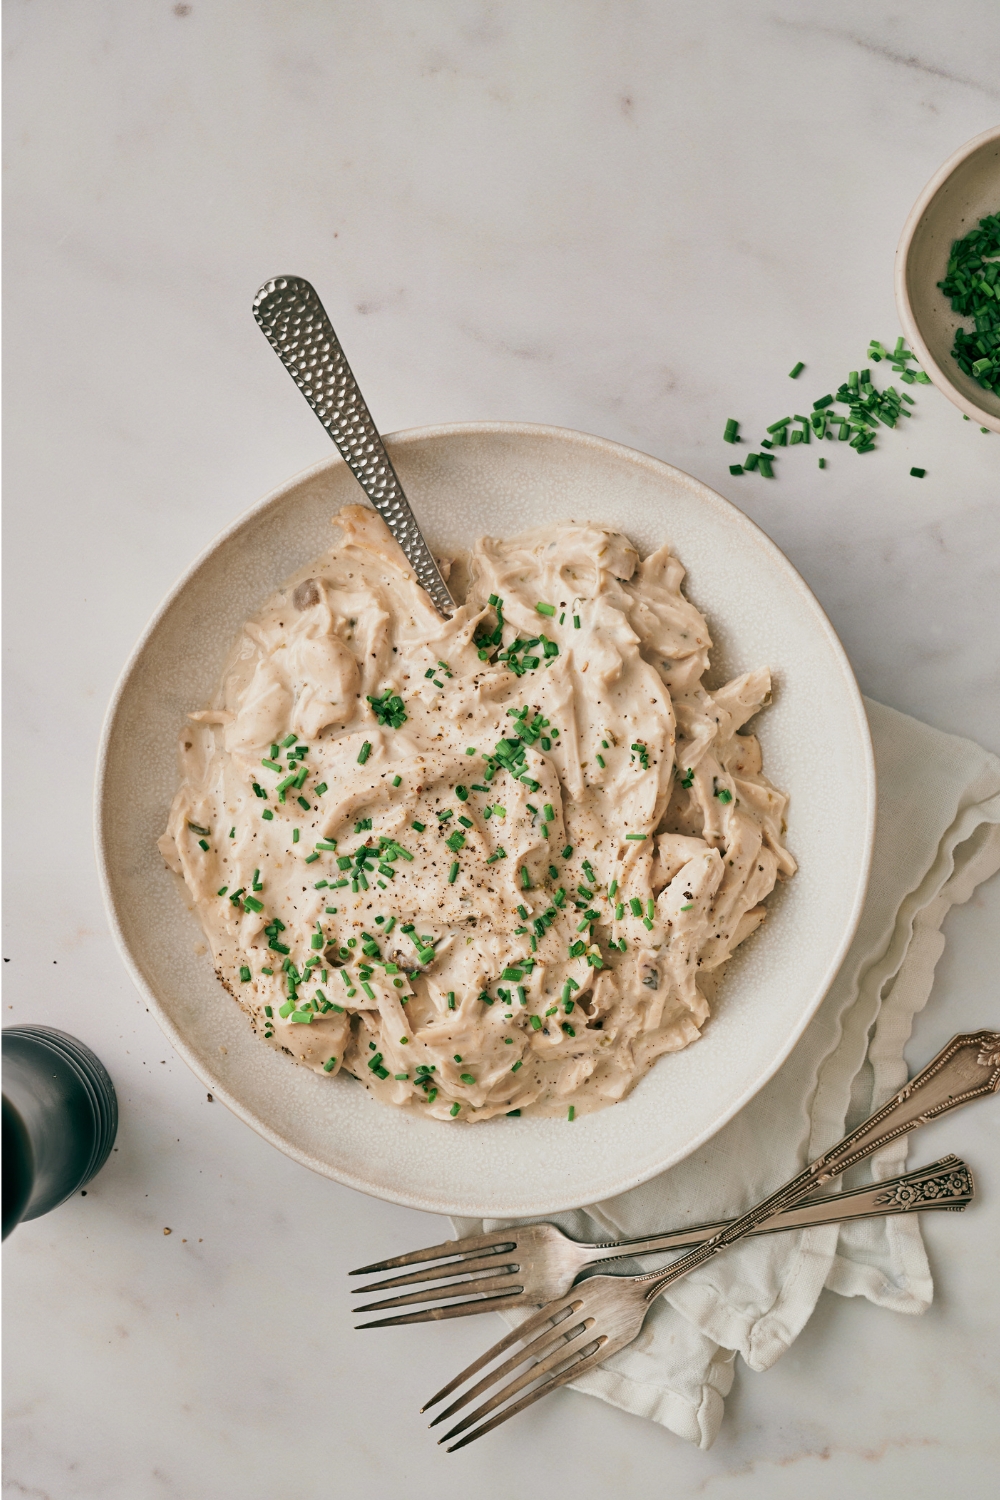 A bowl with cream cheese chicken garnished with chives.